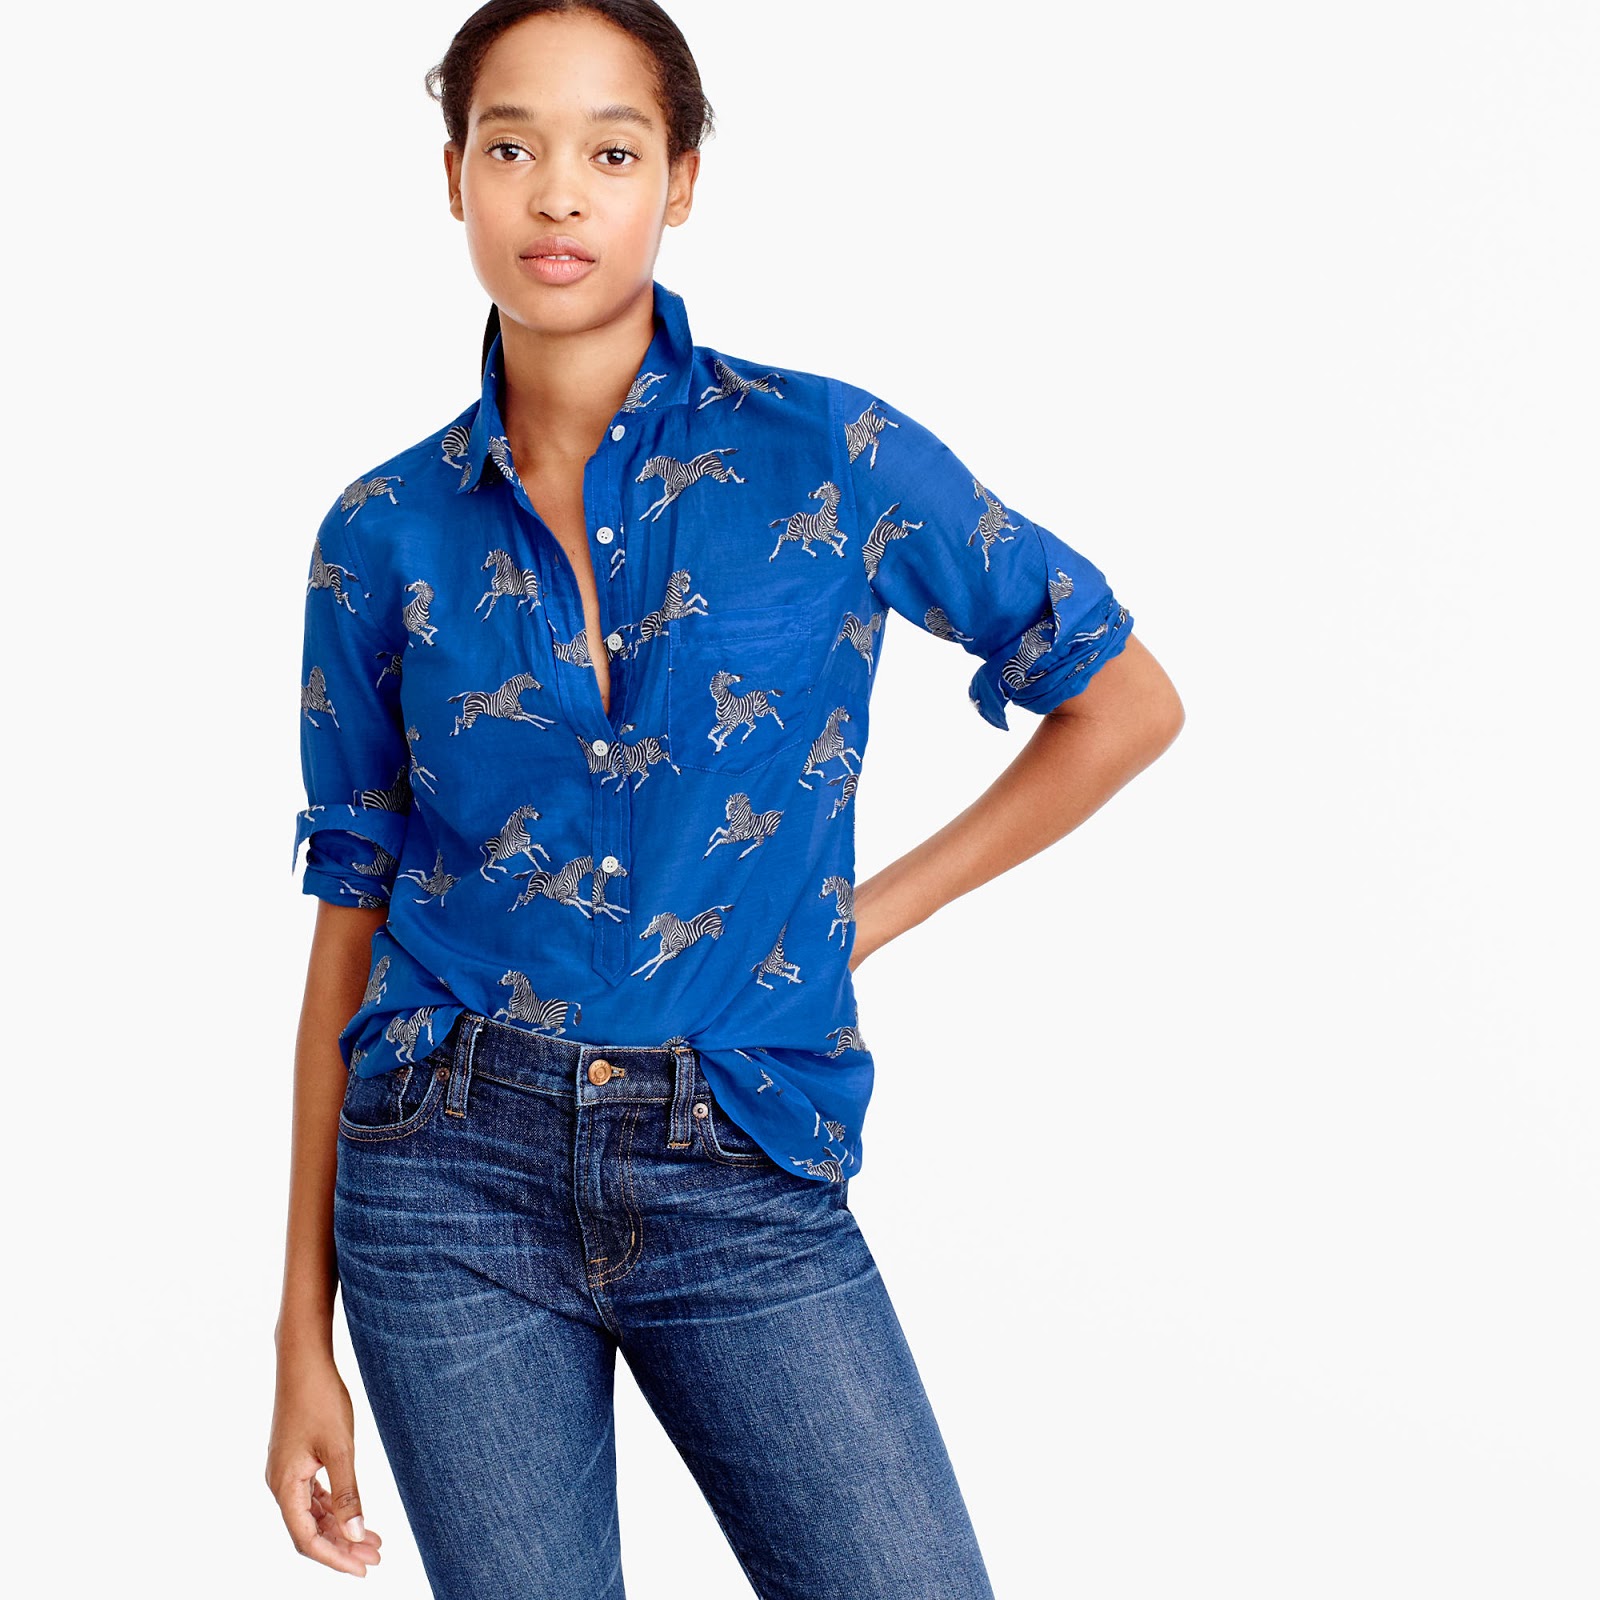 Horse Country Chic: J Crew Holiday Picks